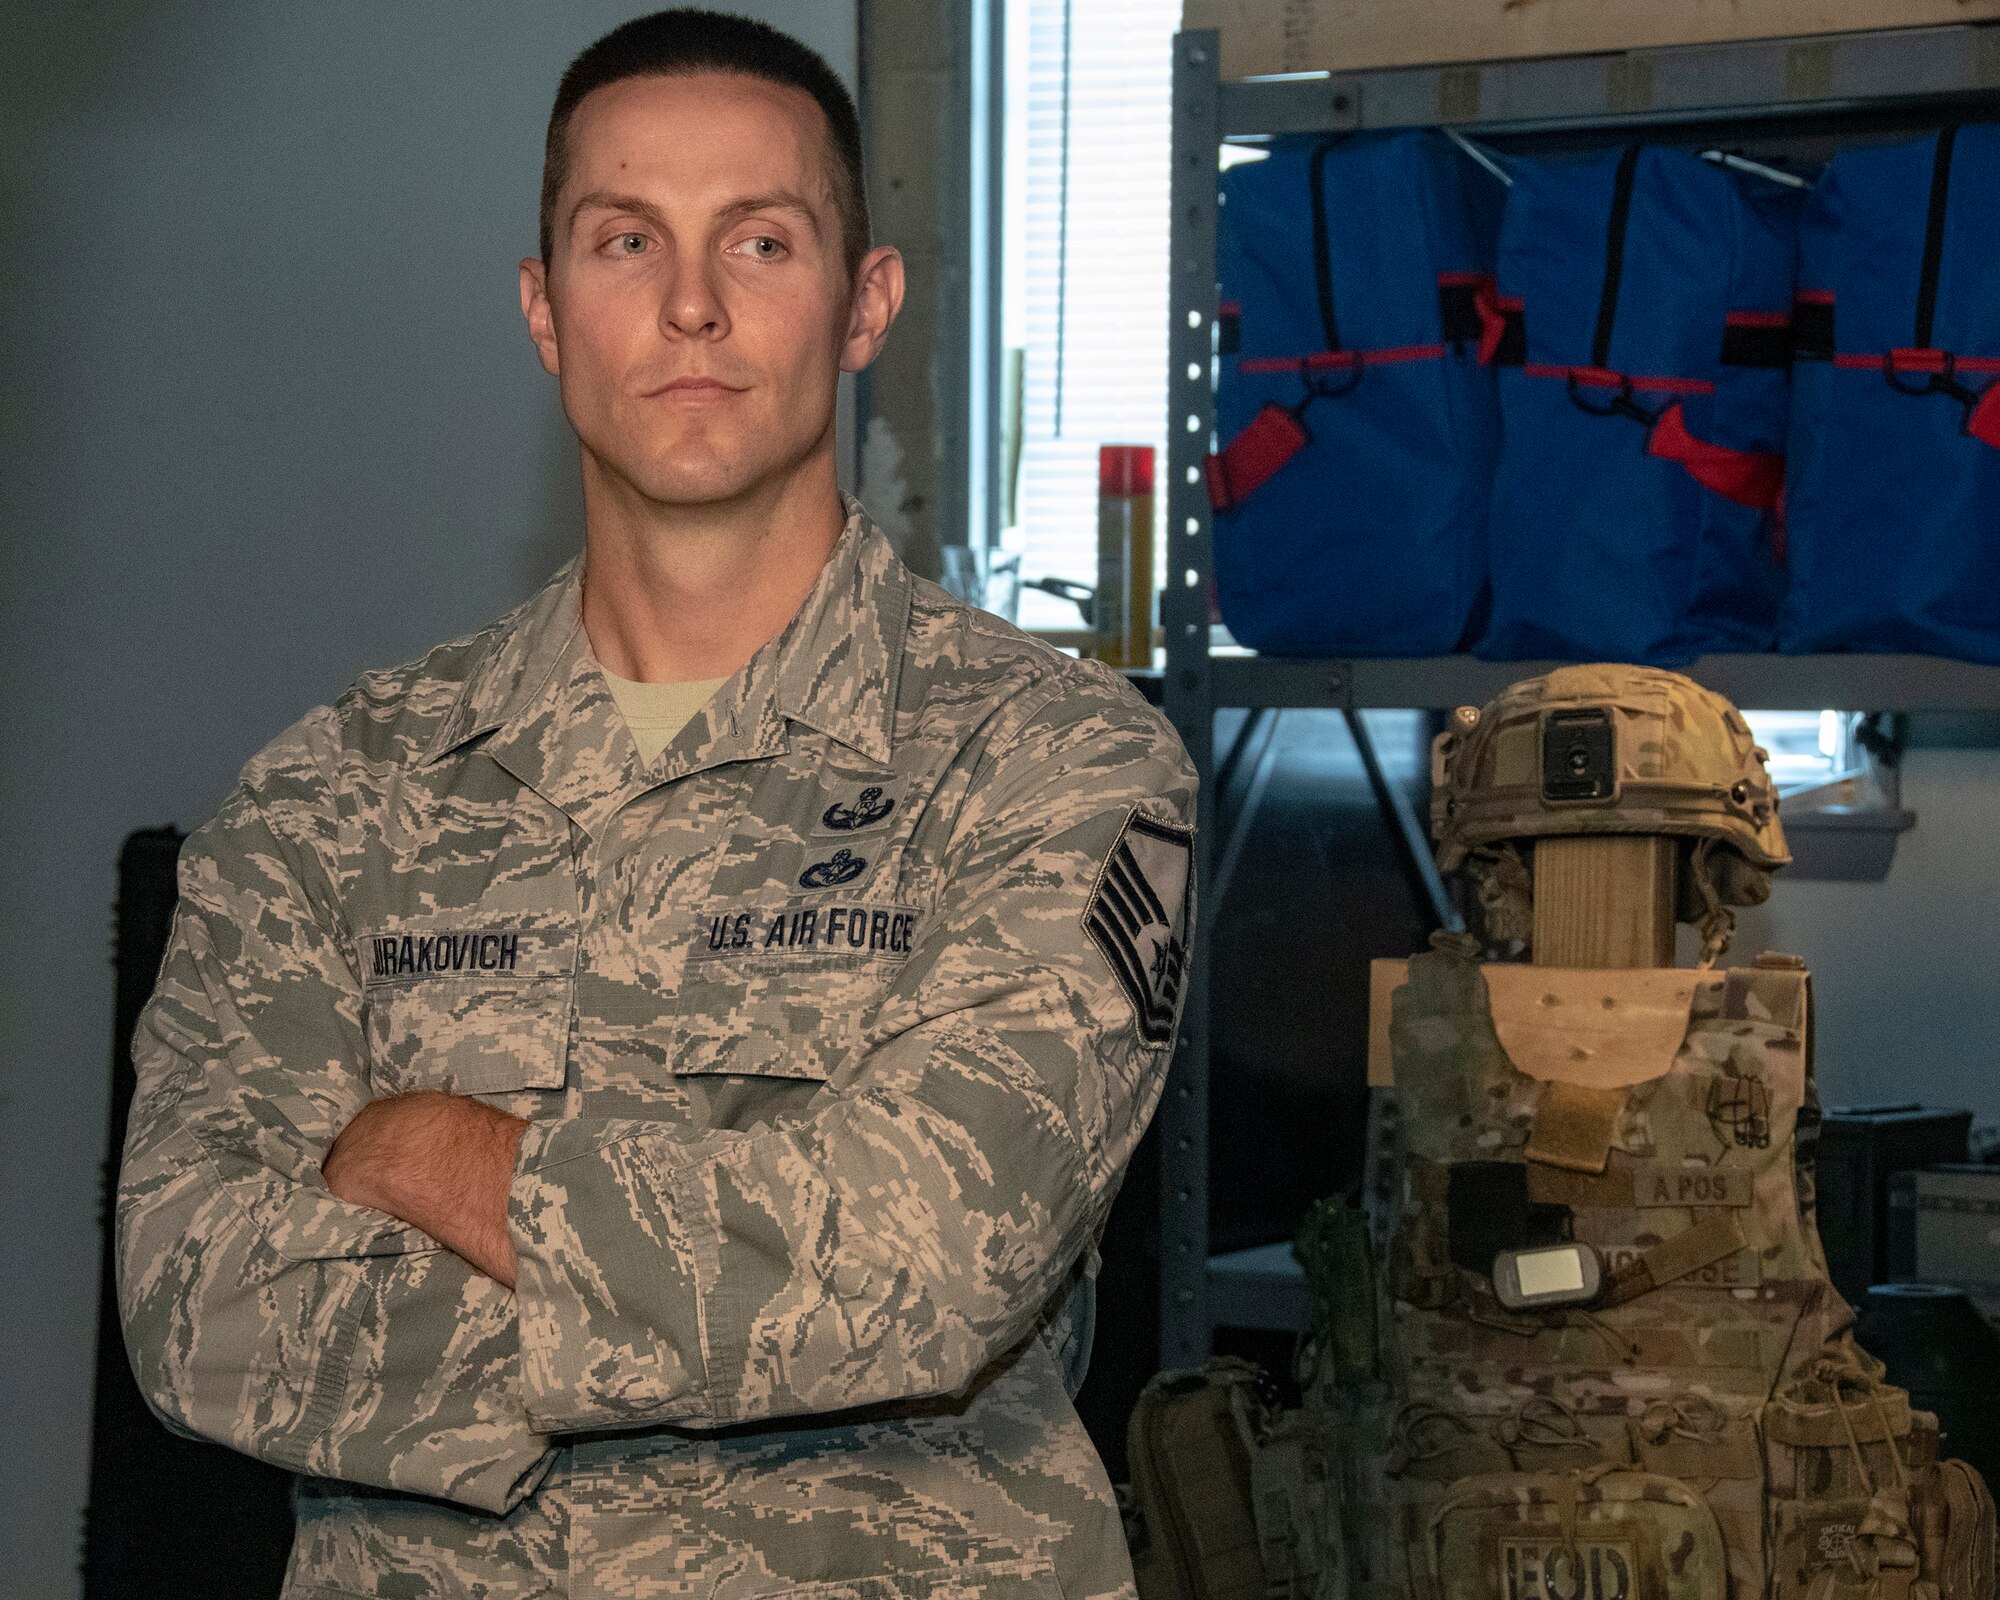 MSgt Mark Jurakovich from the 166th Airlift Wing Explosive Ordinance Disposal Unit, Delaware Air National Guard and the Outstanding Airman of the Year in the category of Senior Noncommissioned officer, poses for photo, Jun 6, 2019. OAY is an ANG command chief program to recognize the best of the best Airman throughout the ANG enterprise. (U.S. Air National Guard photo by Master Sgt. David J. Fenner)